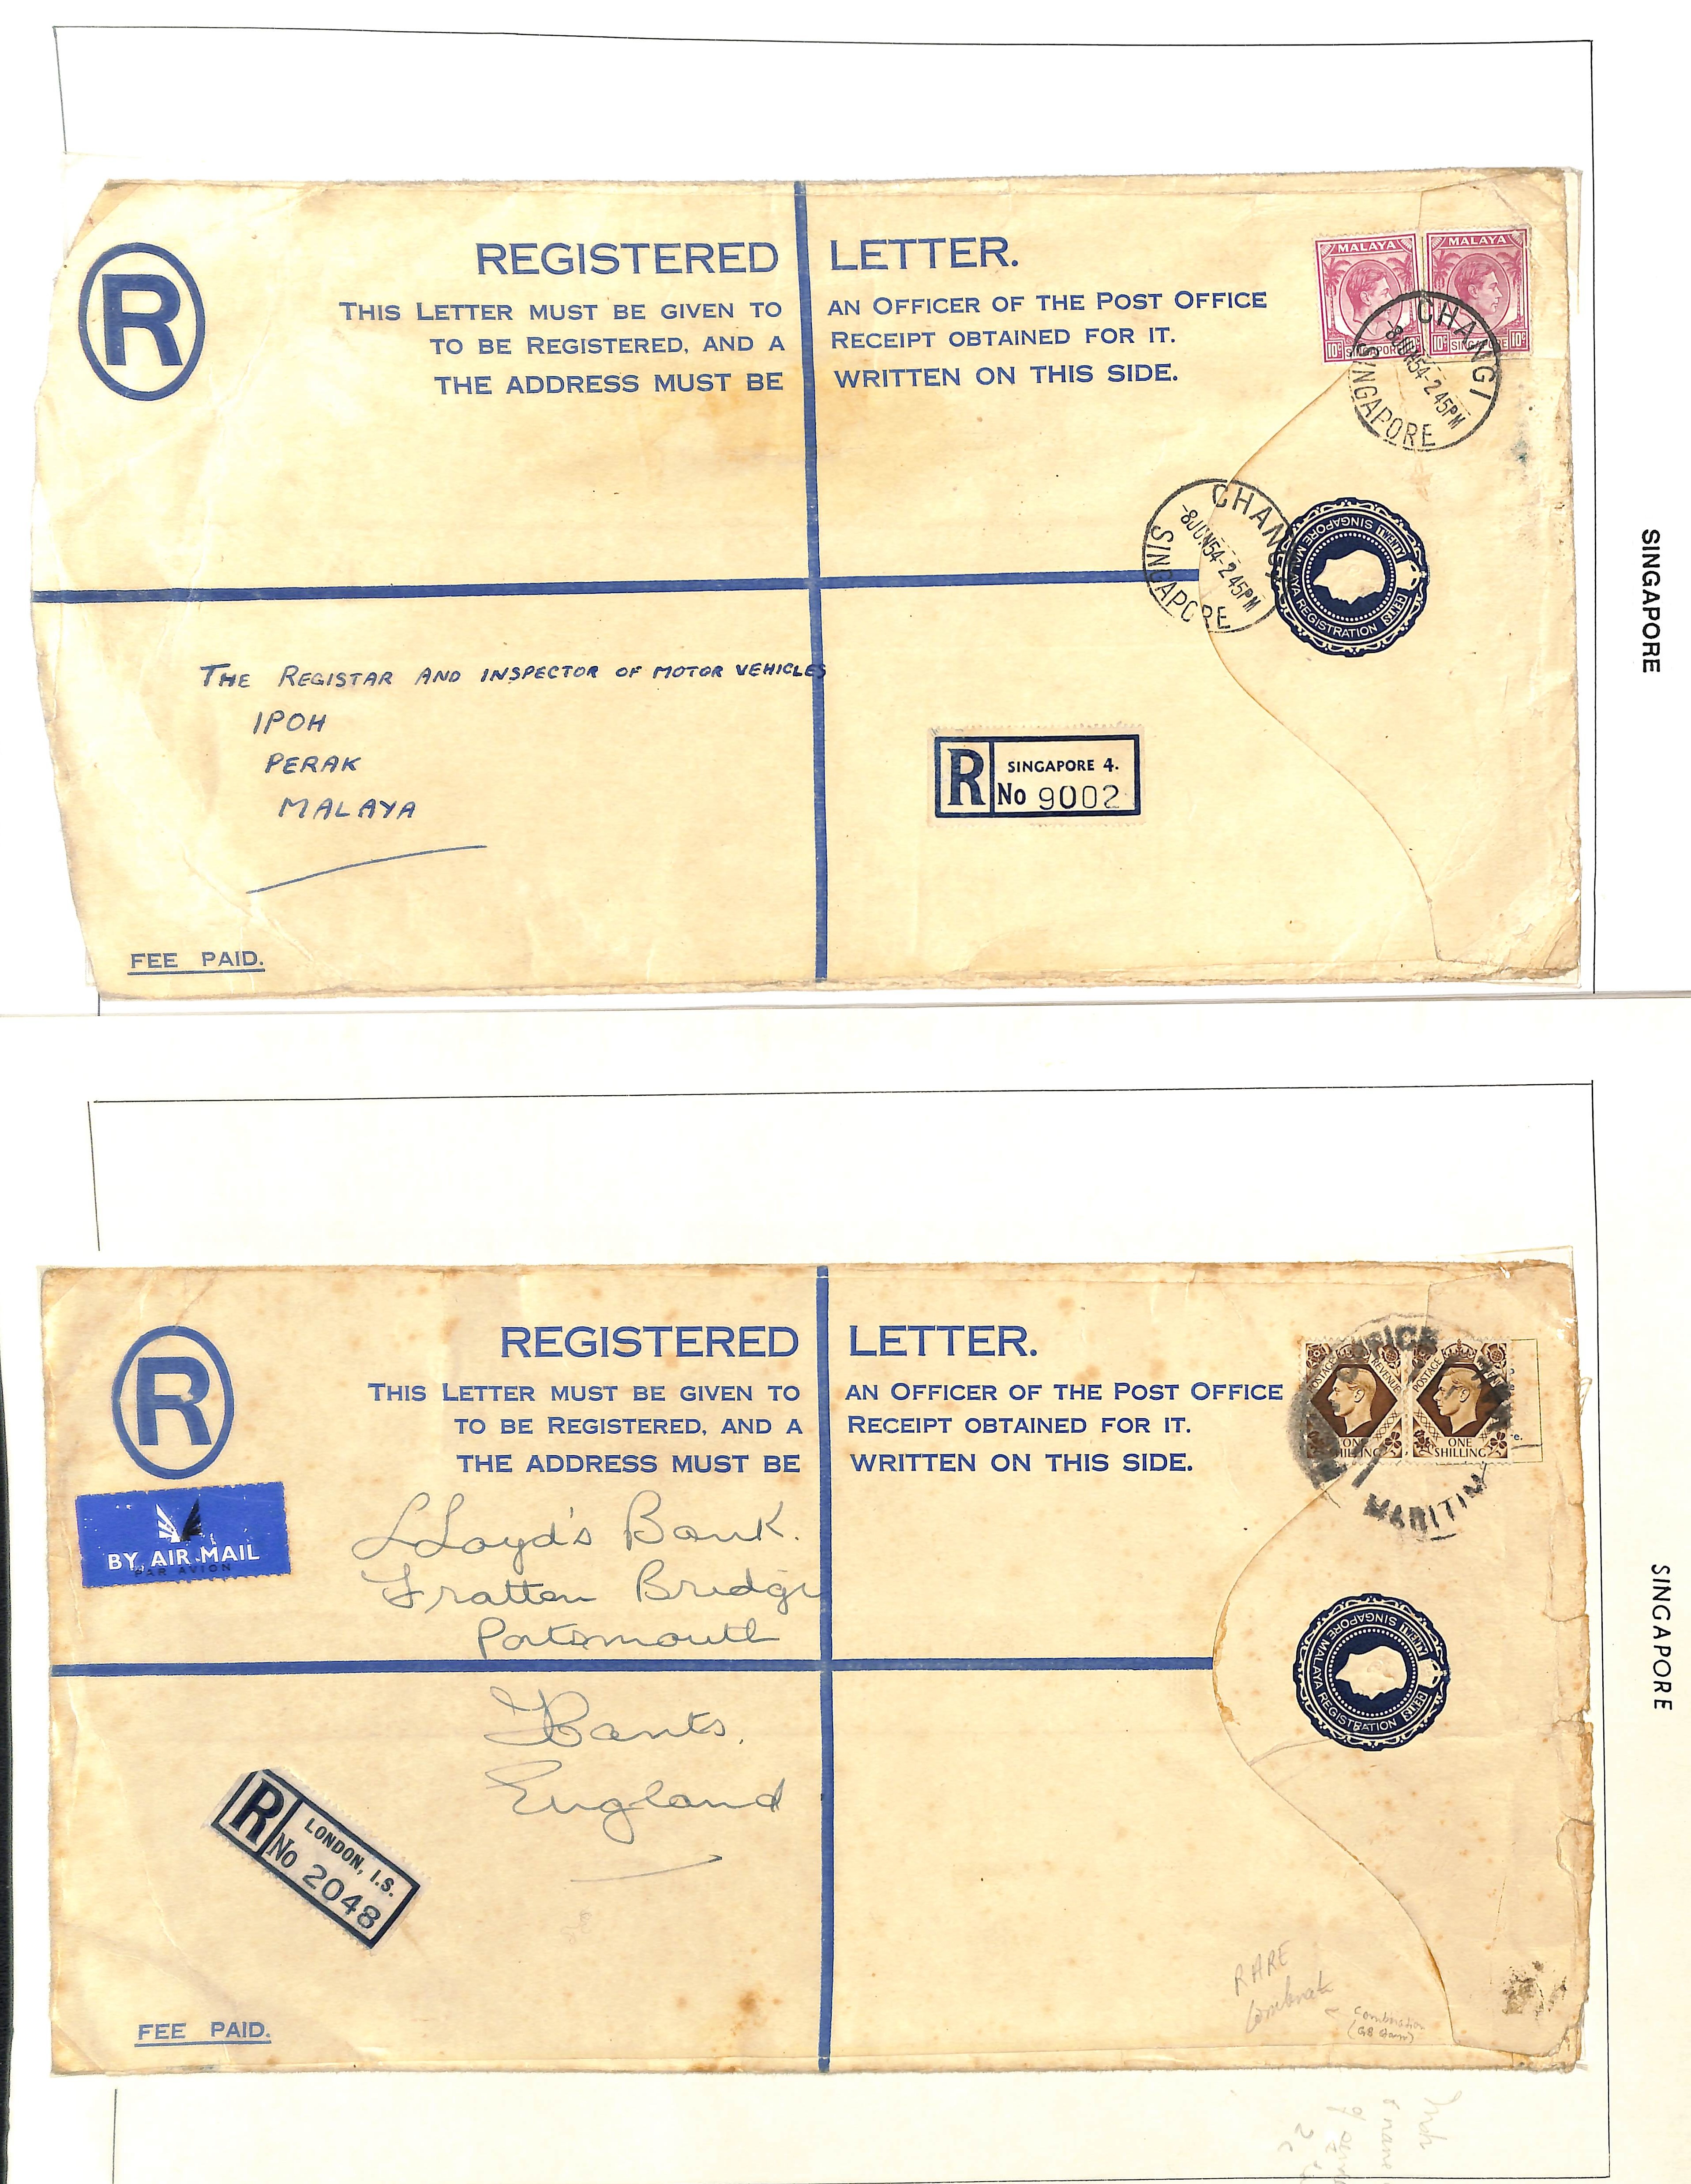 1948-55 KGVI 20c Registration envelopes, first issue without space for senders address on reverse, - Image 3 of 4